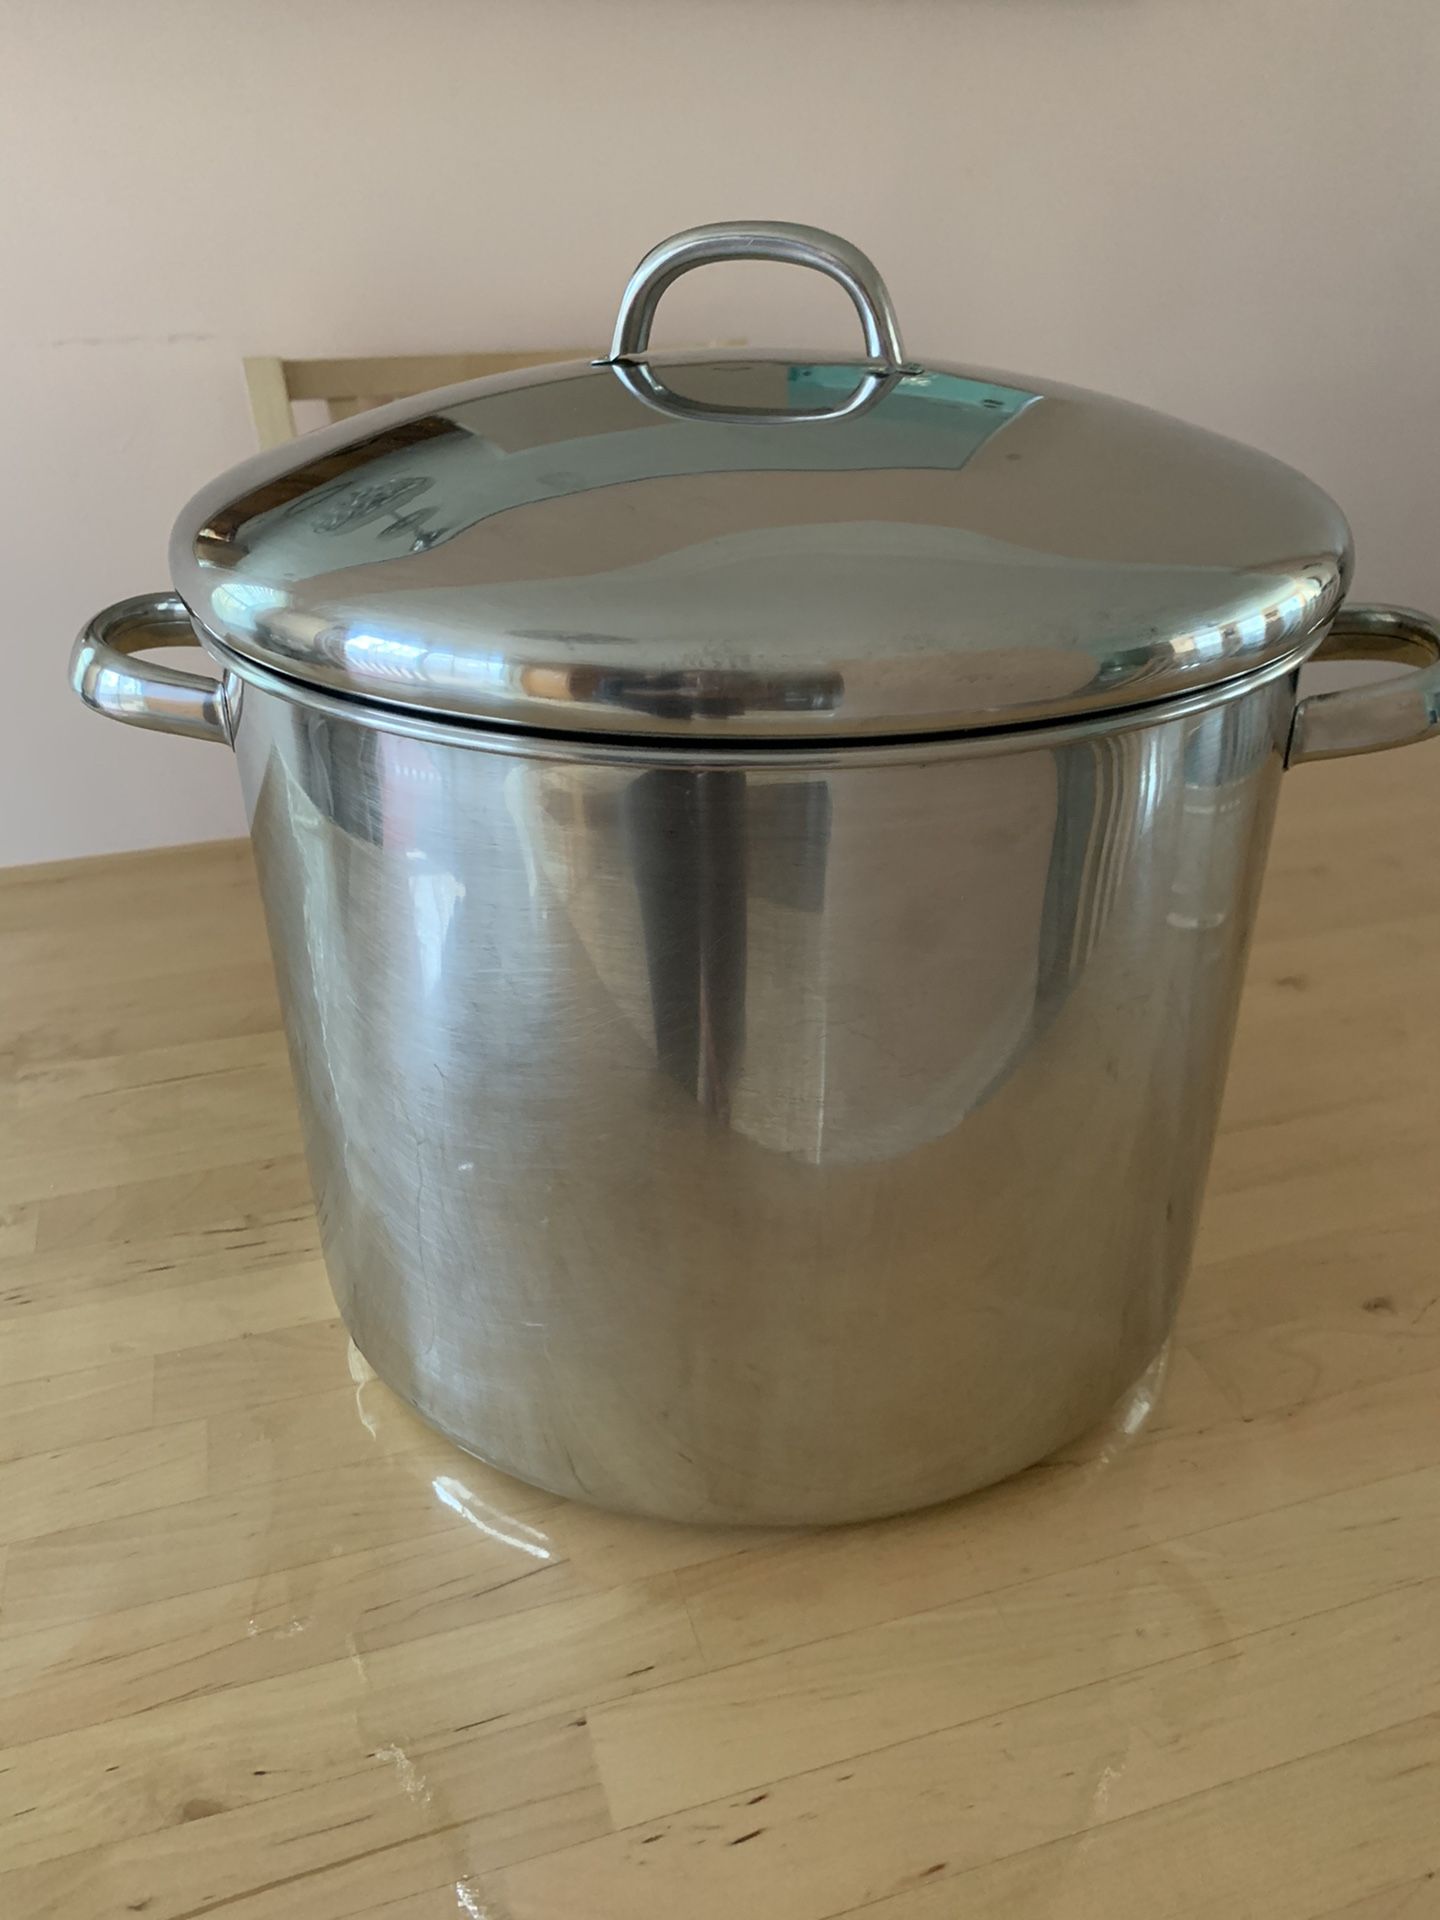 Huge 17-QT Stainless Steel Pot by Tools Of The Trade by Macy’s $40 OBO